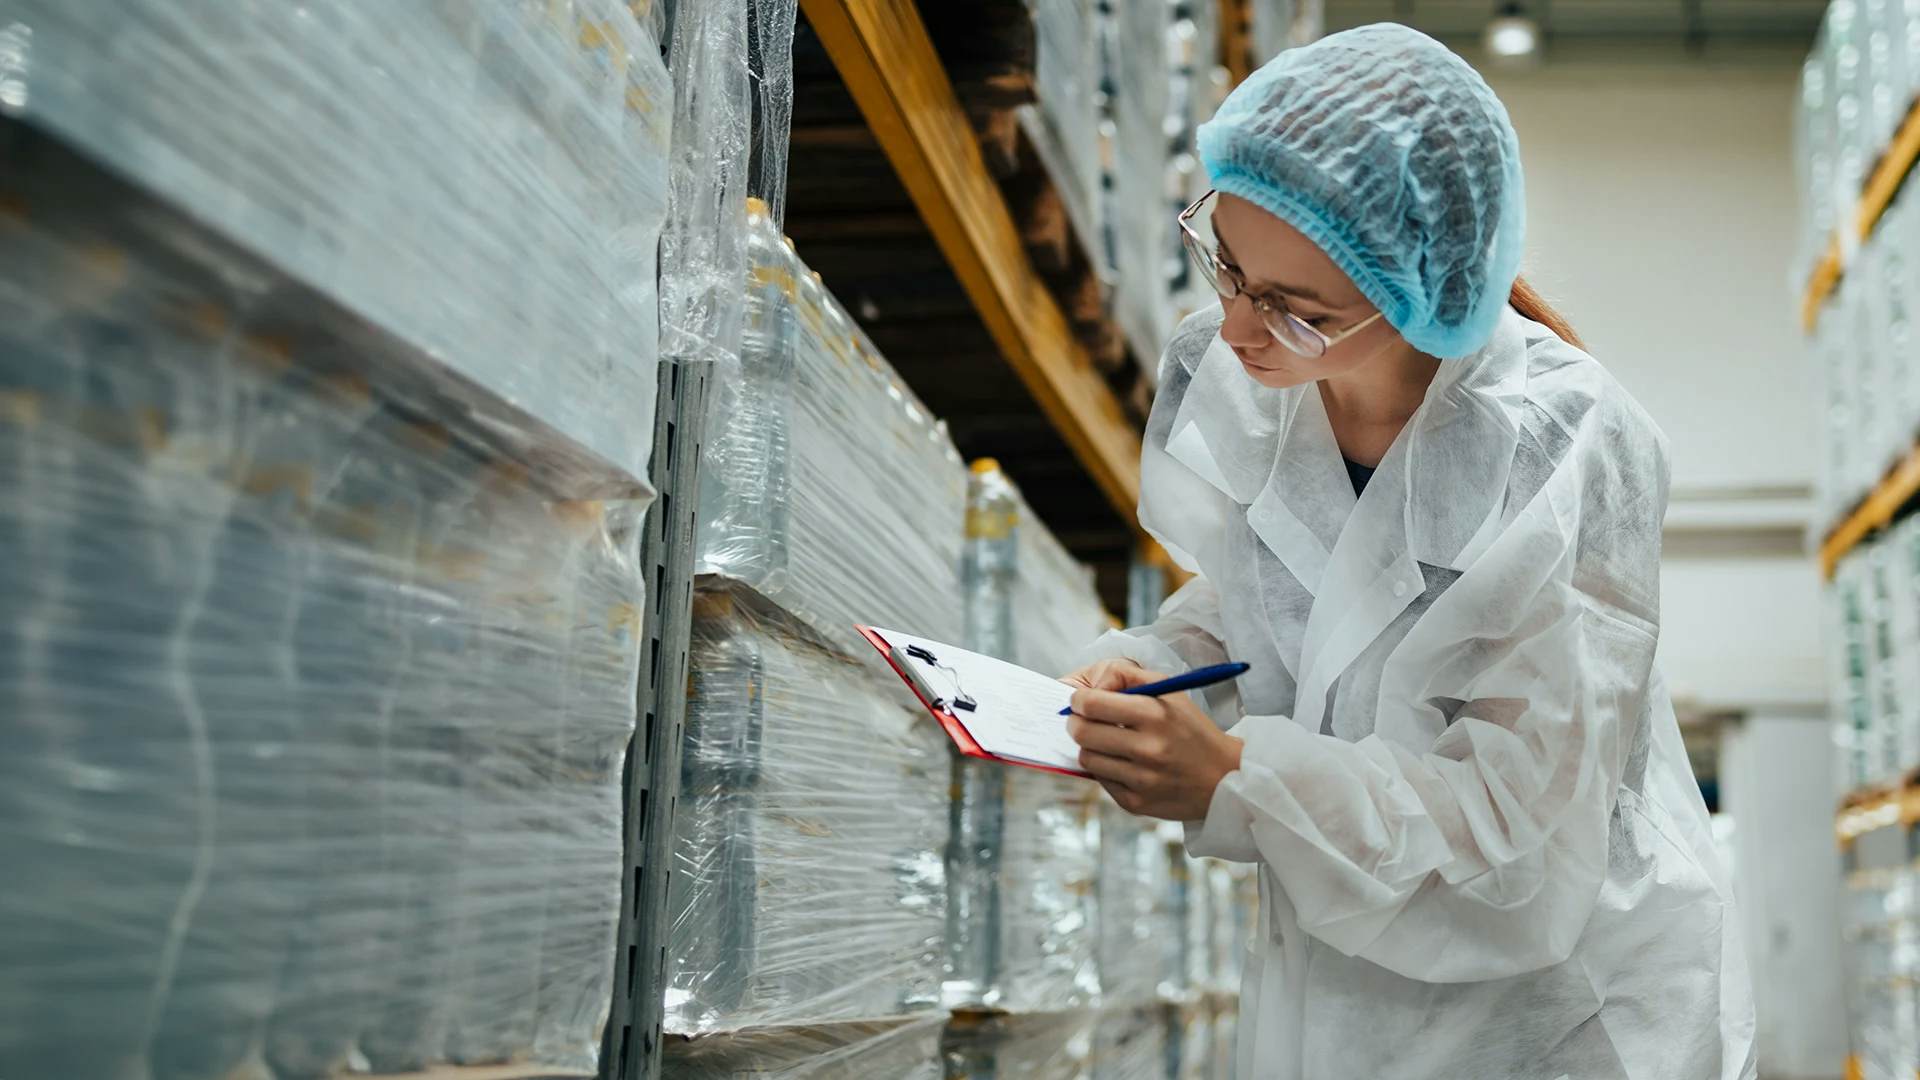 Worker in lab coat checking inventory in a pharmaceutical warehouse.